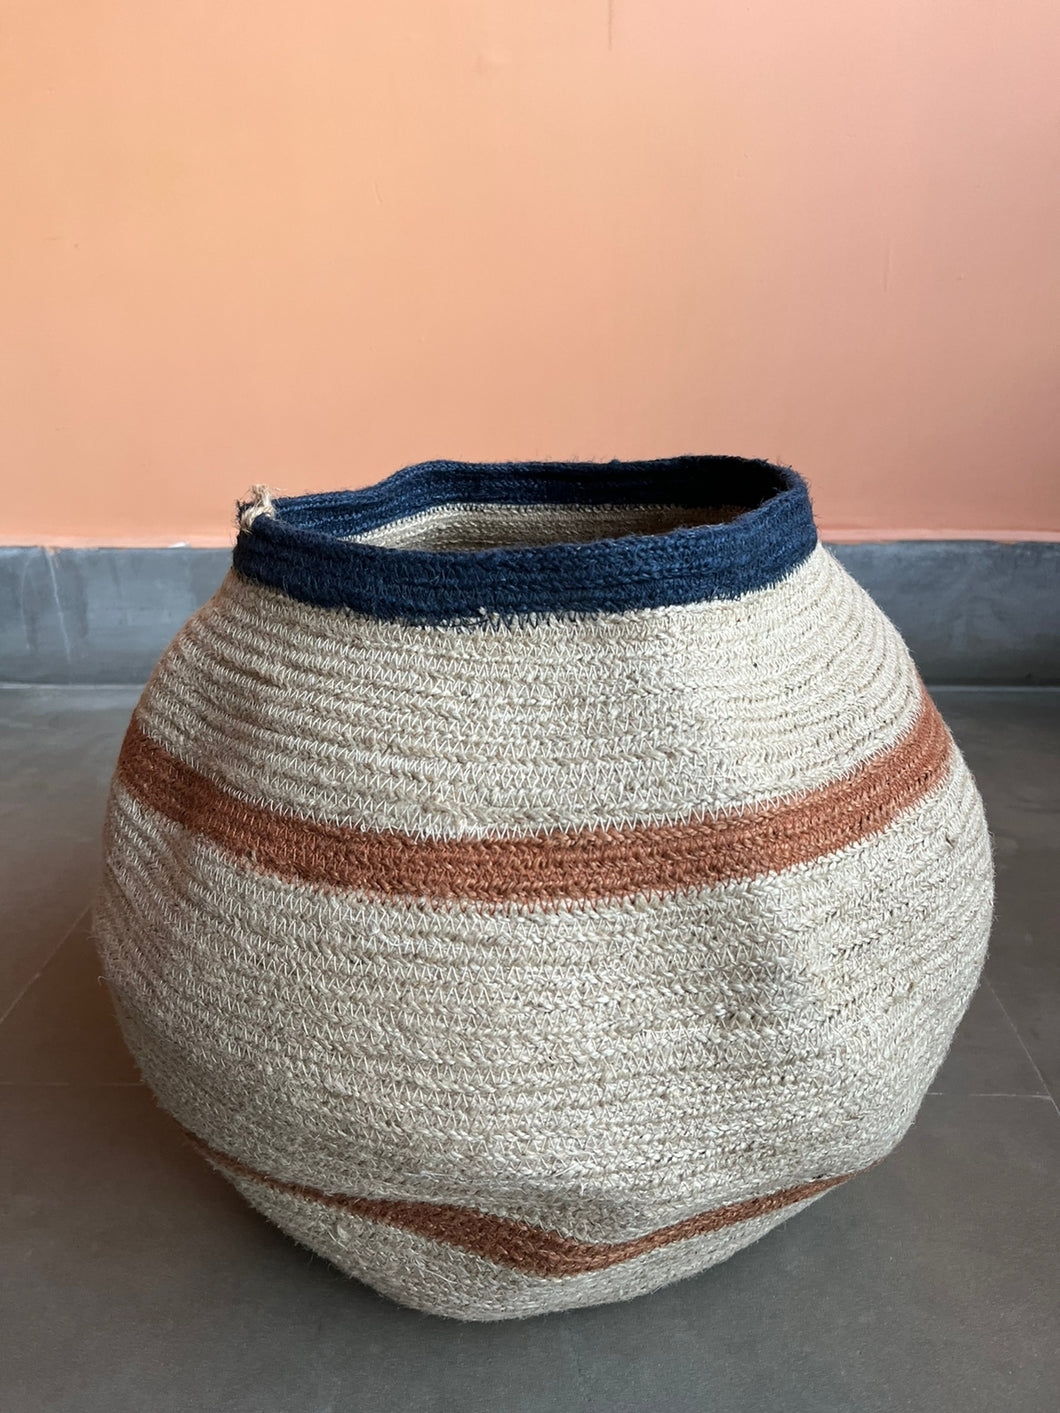 Collectible Jute Pitcher | KNS 005